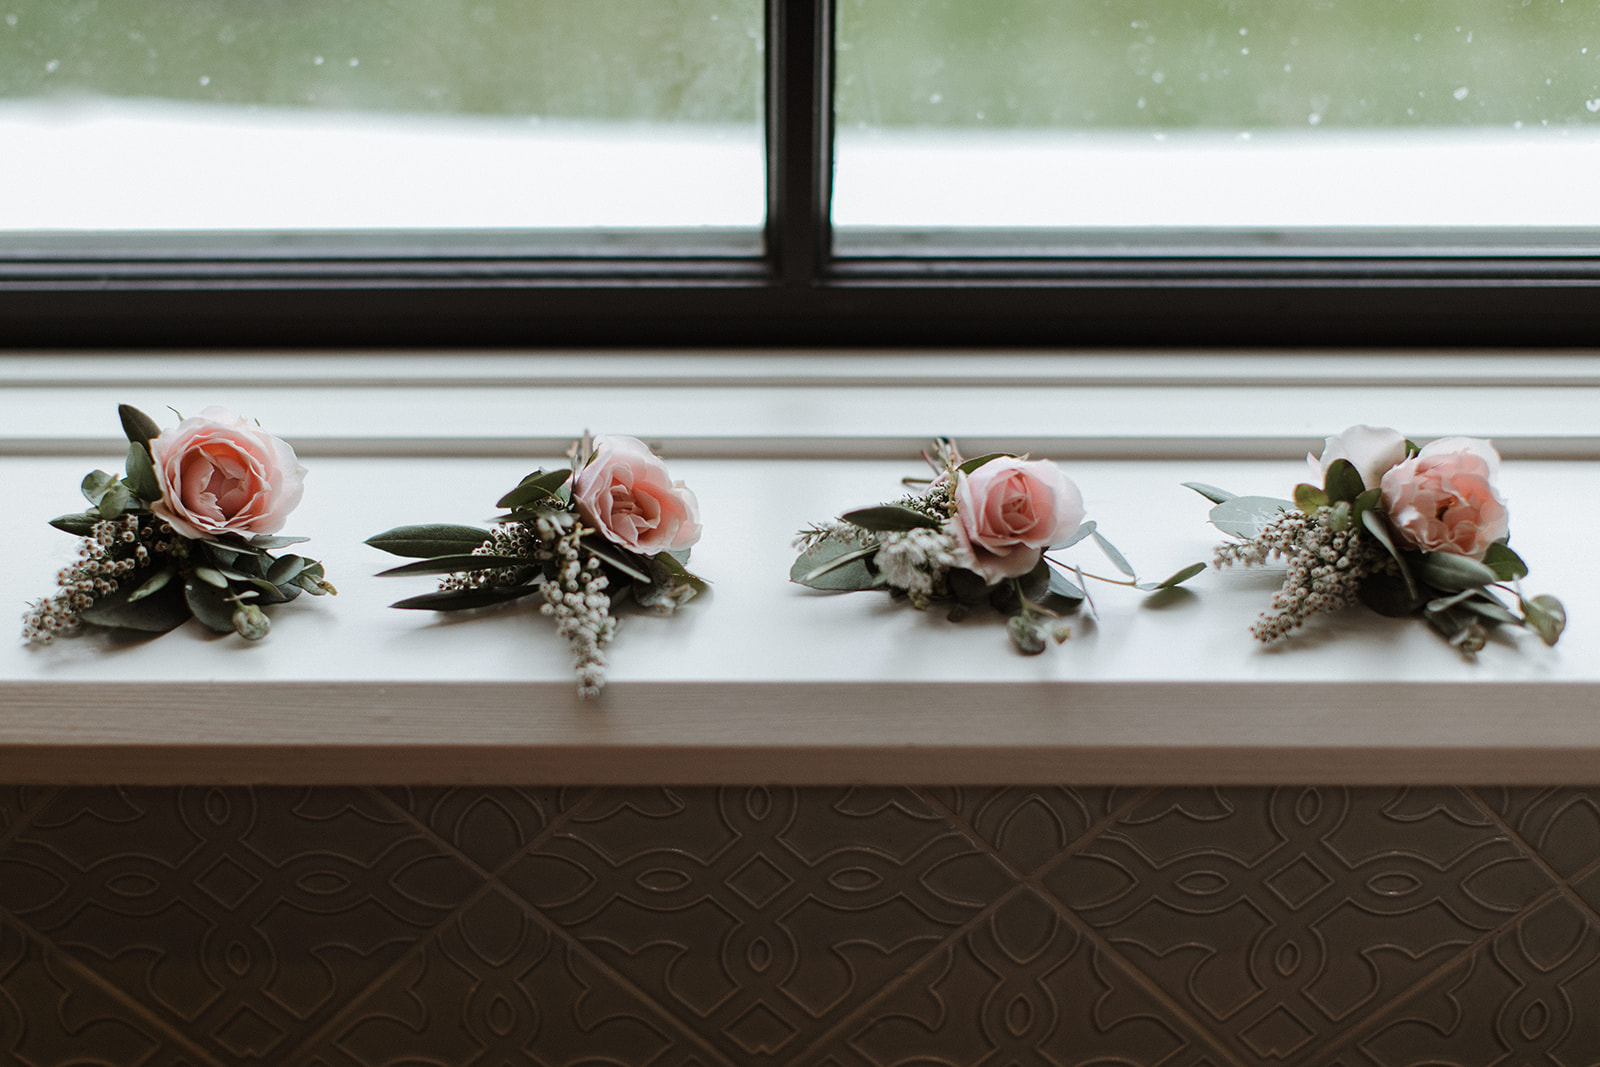 Blush boutonnieres with texture and greenery. Nashville Wedding Floral Design.